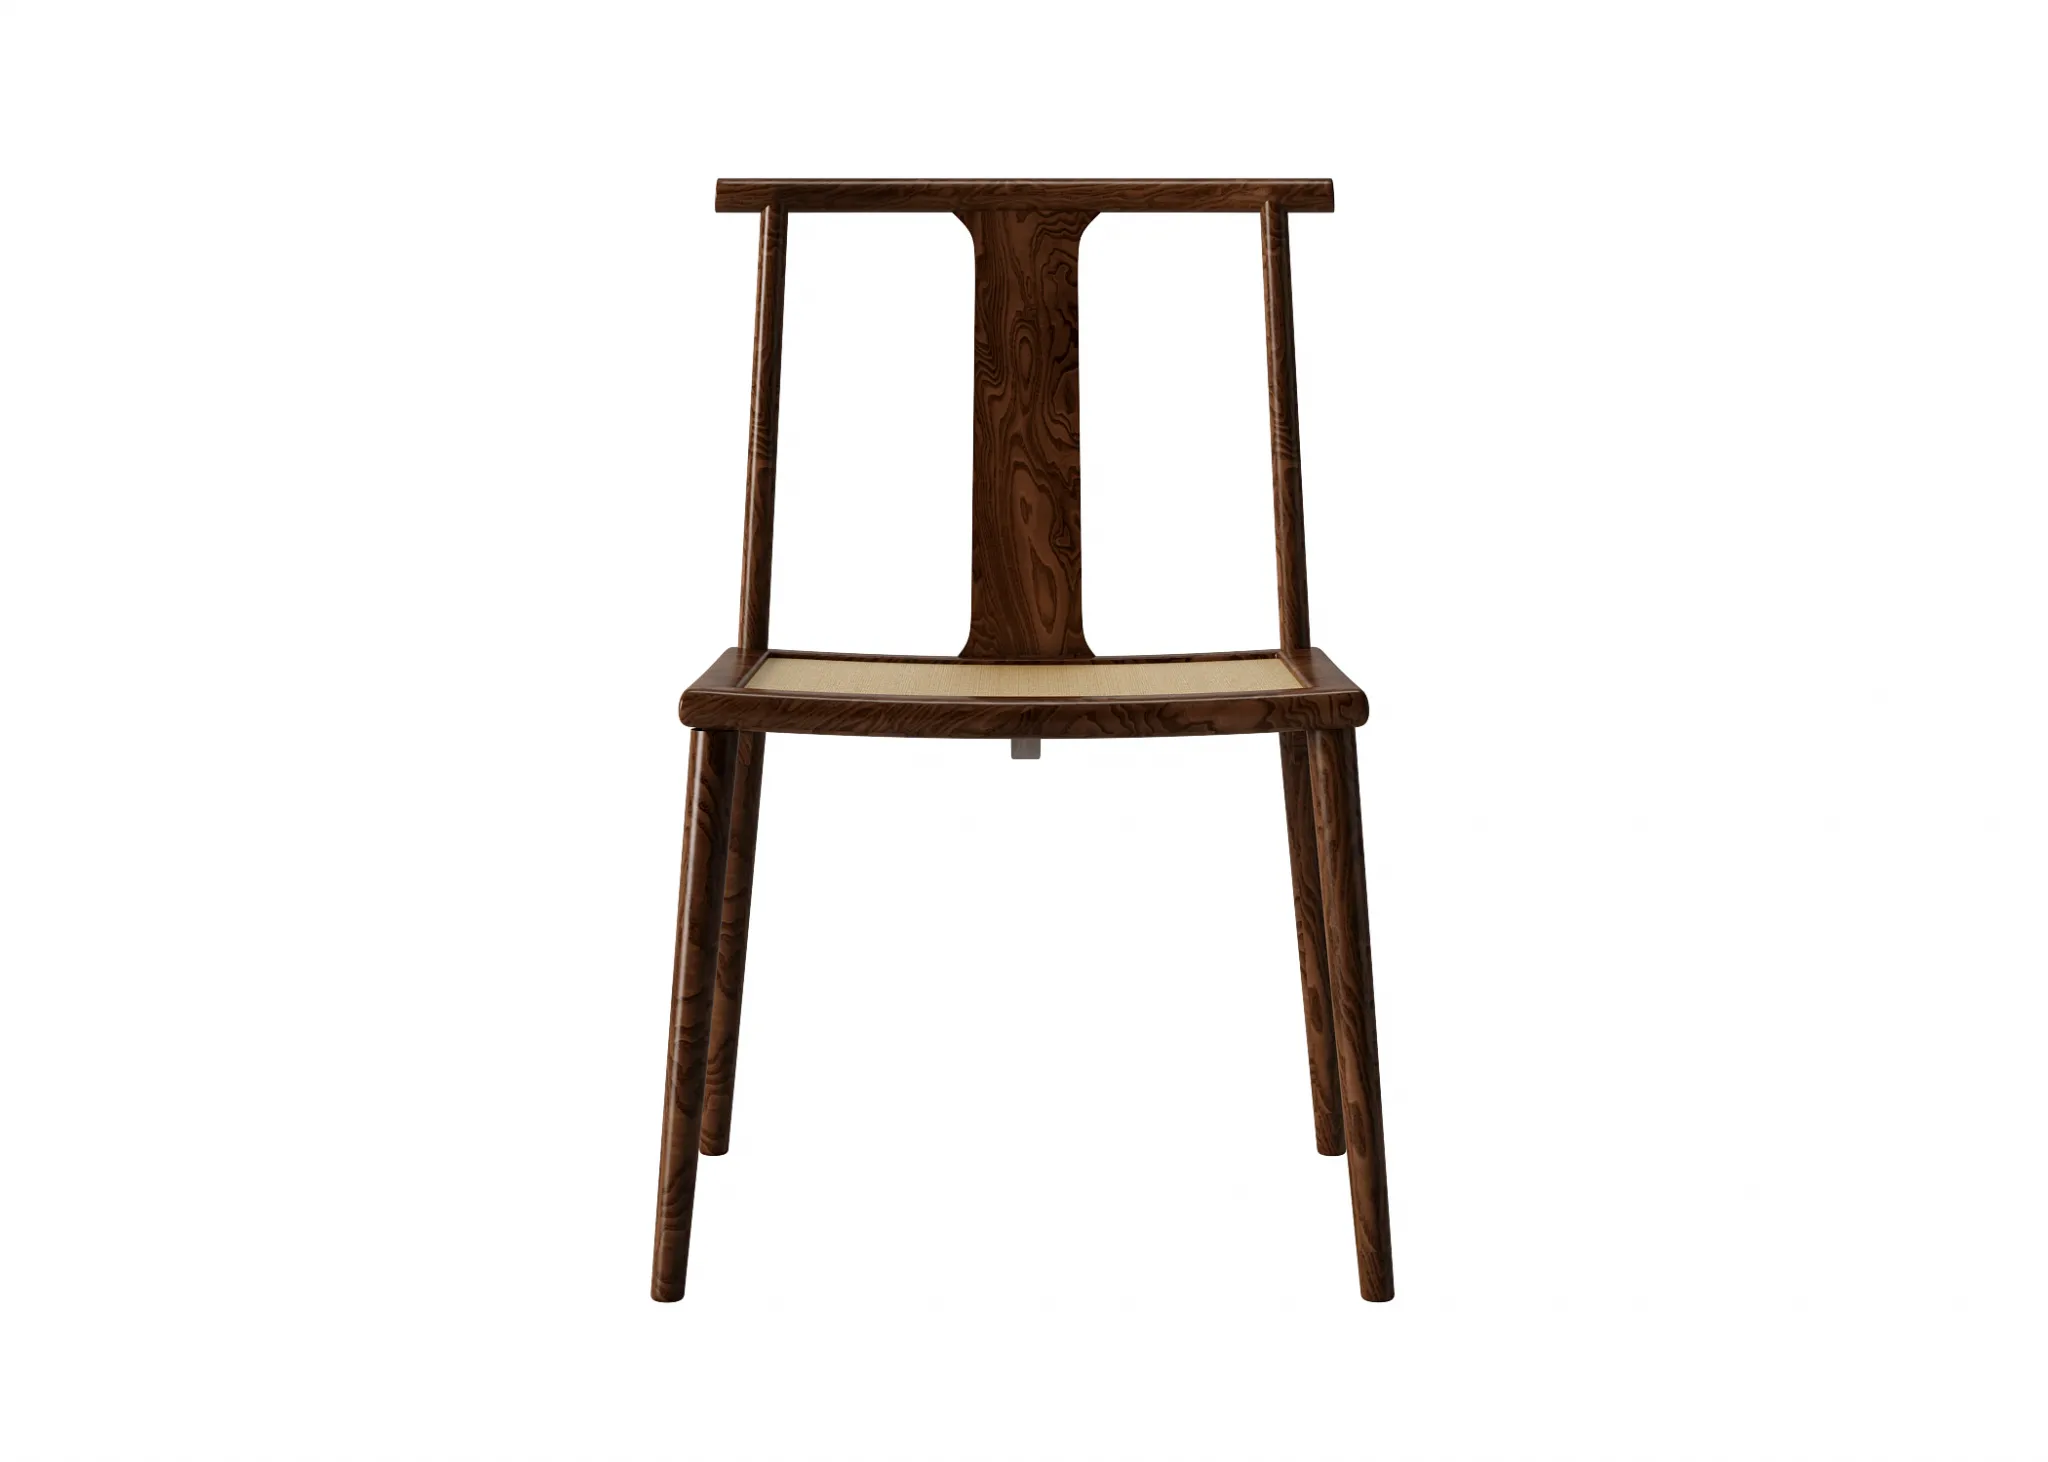 FURNITURE 3D MODELS – CHAIRS – 0475